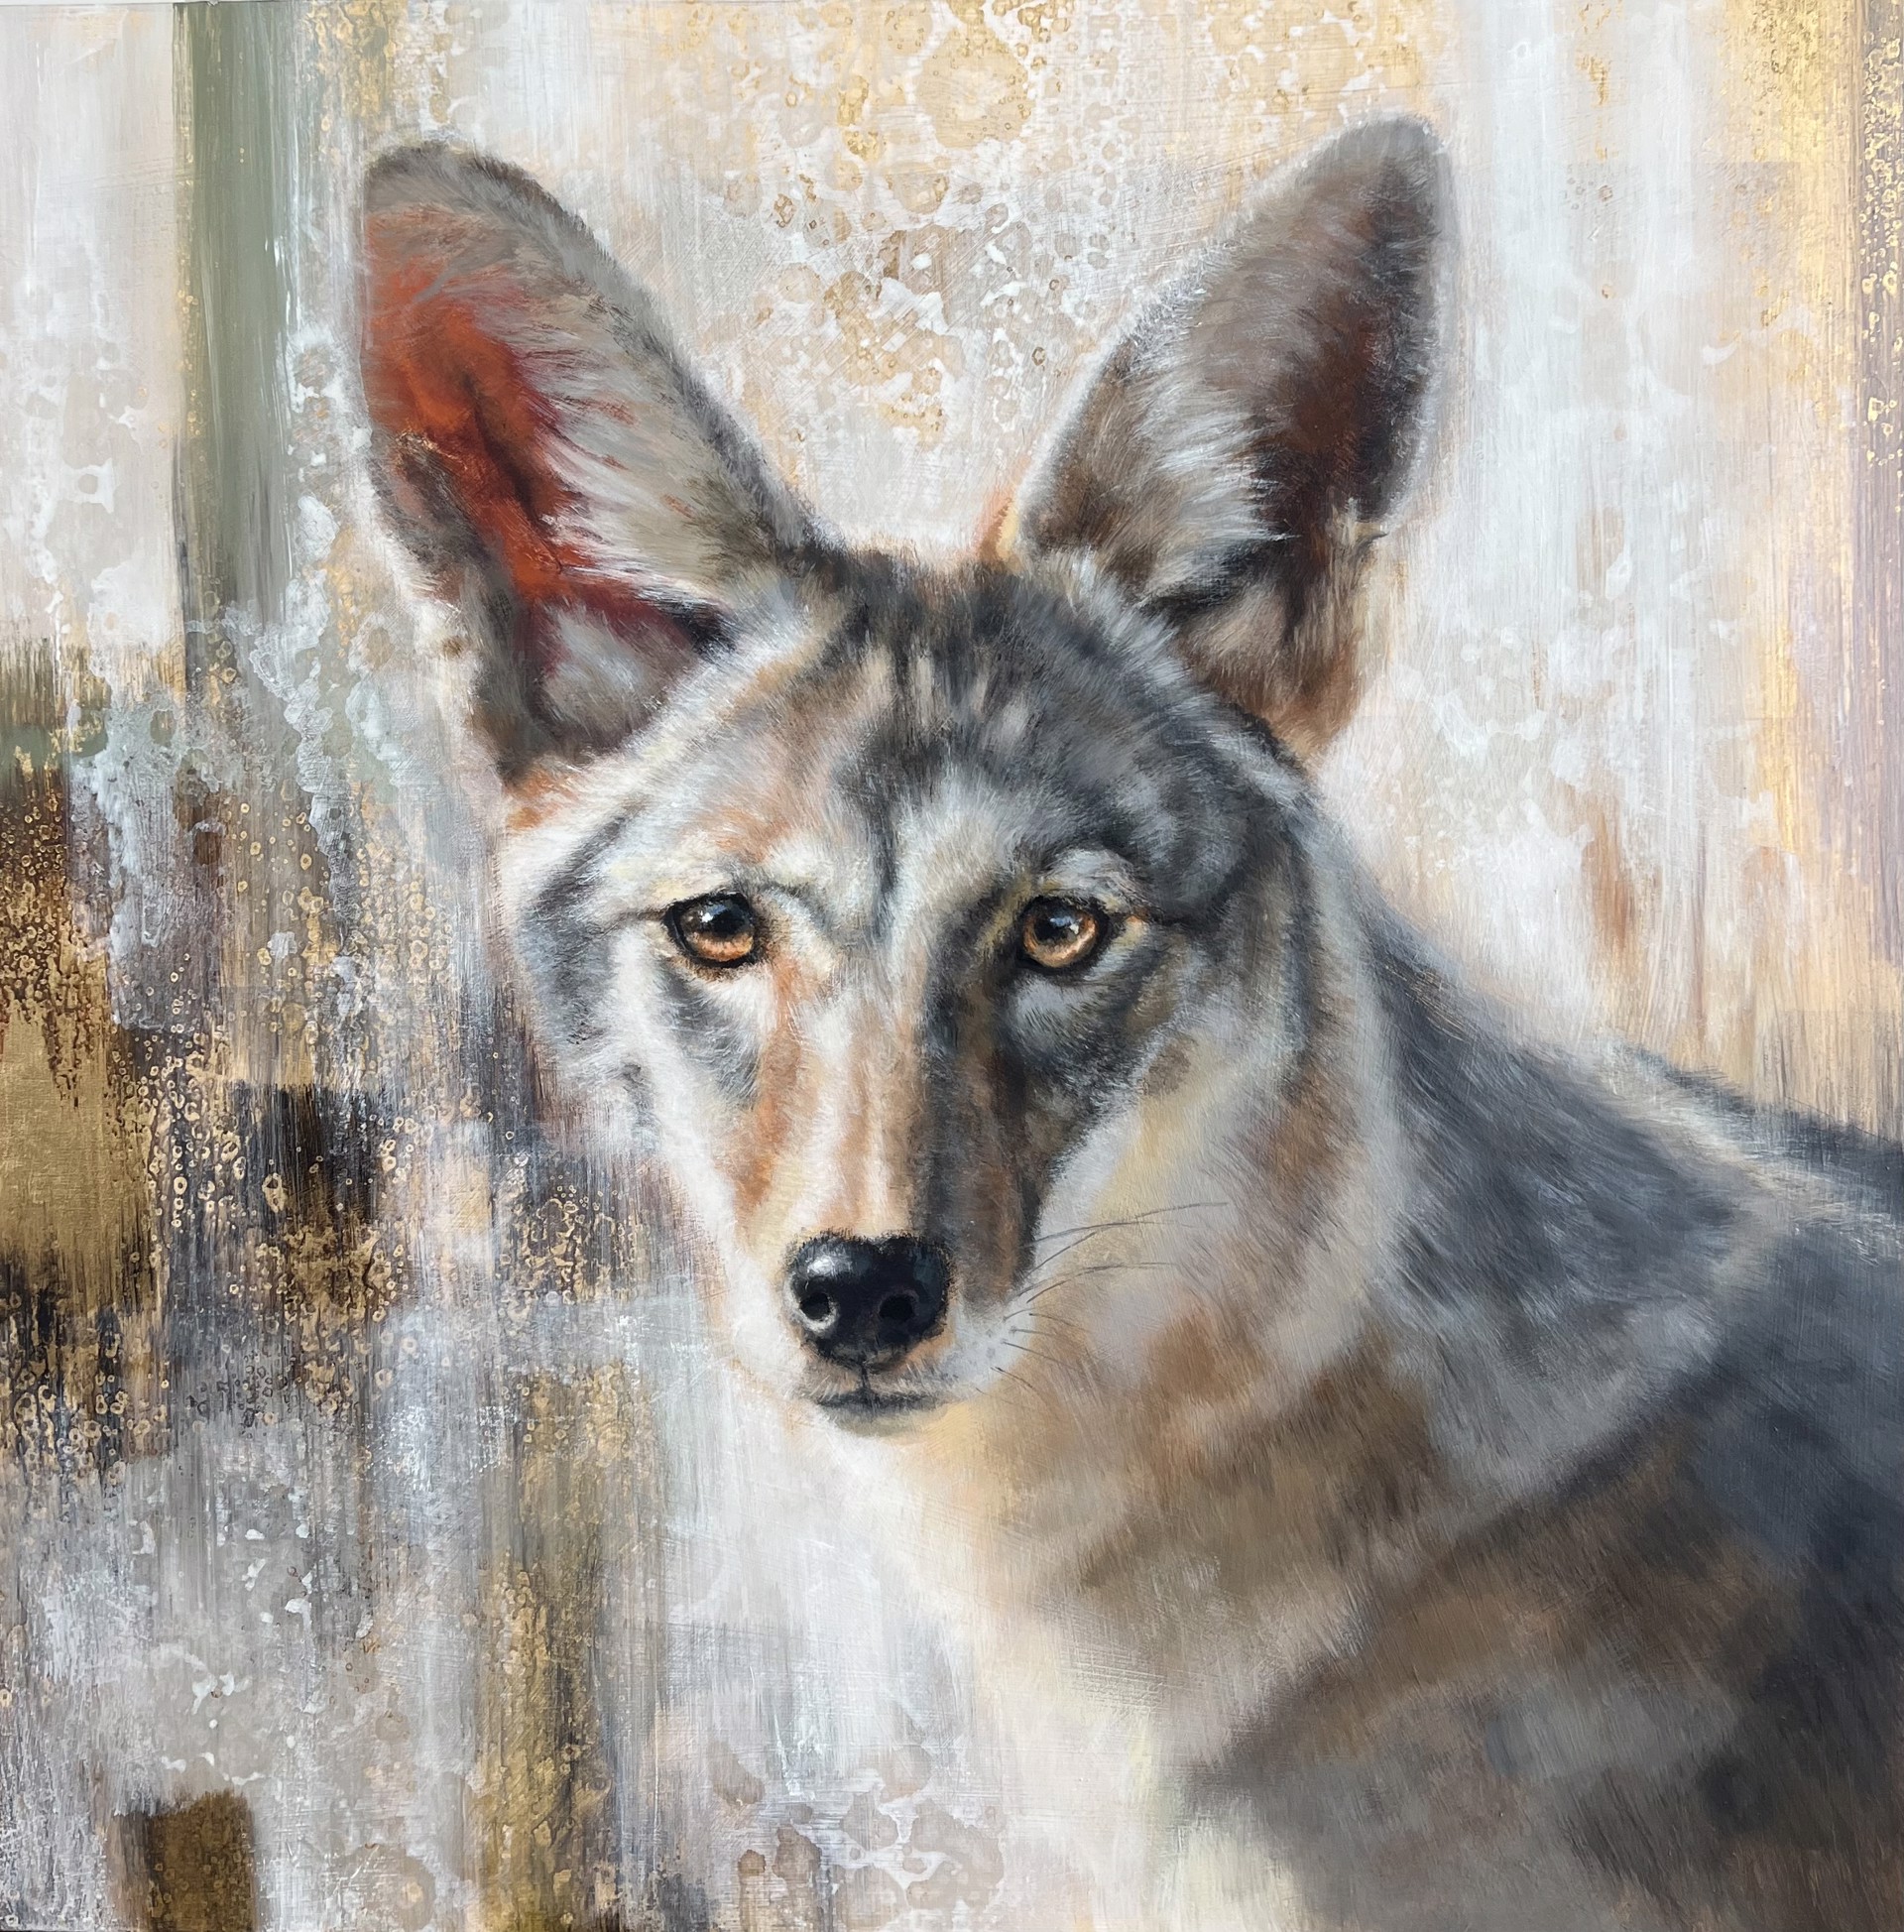 Coyote by Nealy Riley